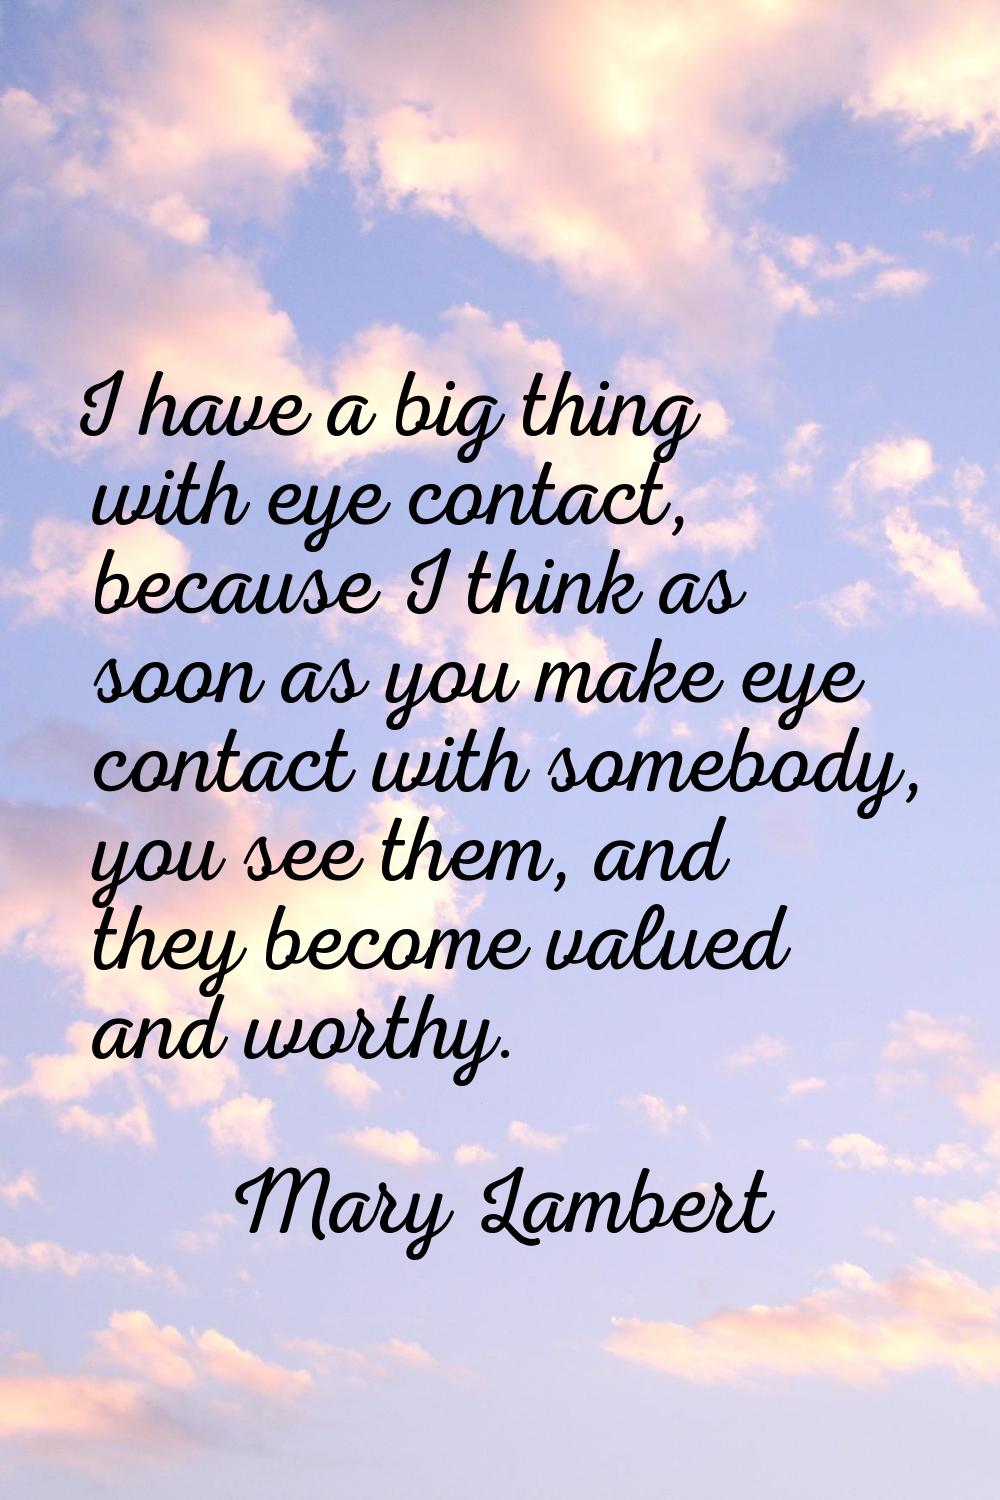 I have a big thing with eye contact, because I think as soon as you make eye contact with somebody,